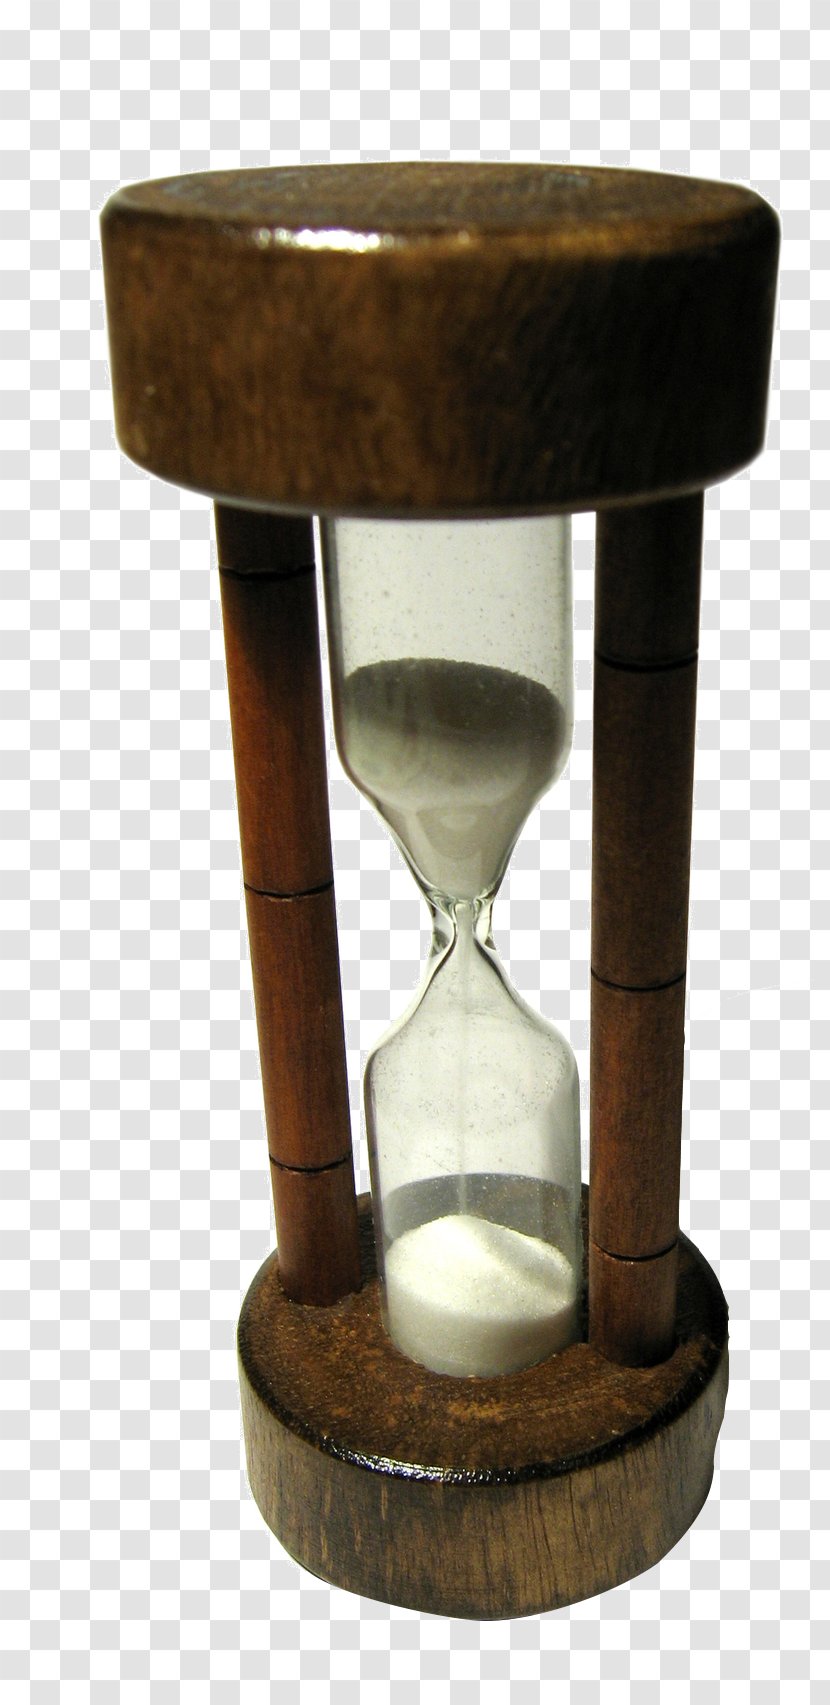 United States Student Time Wait List Information - Word - Hourglass Decoration Transparent PNG